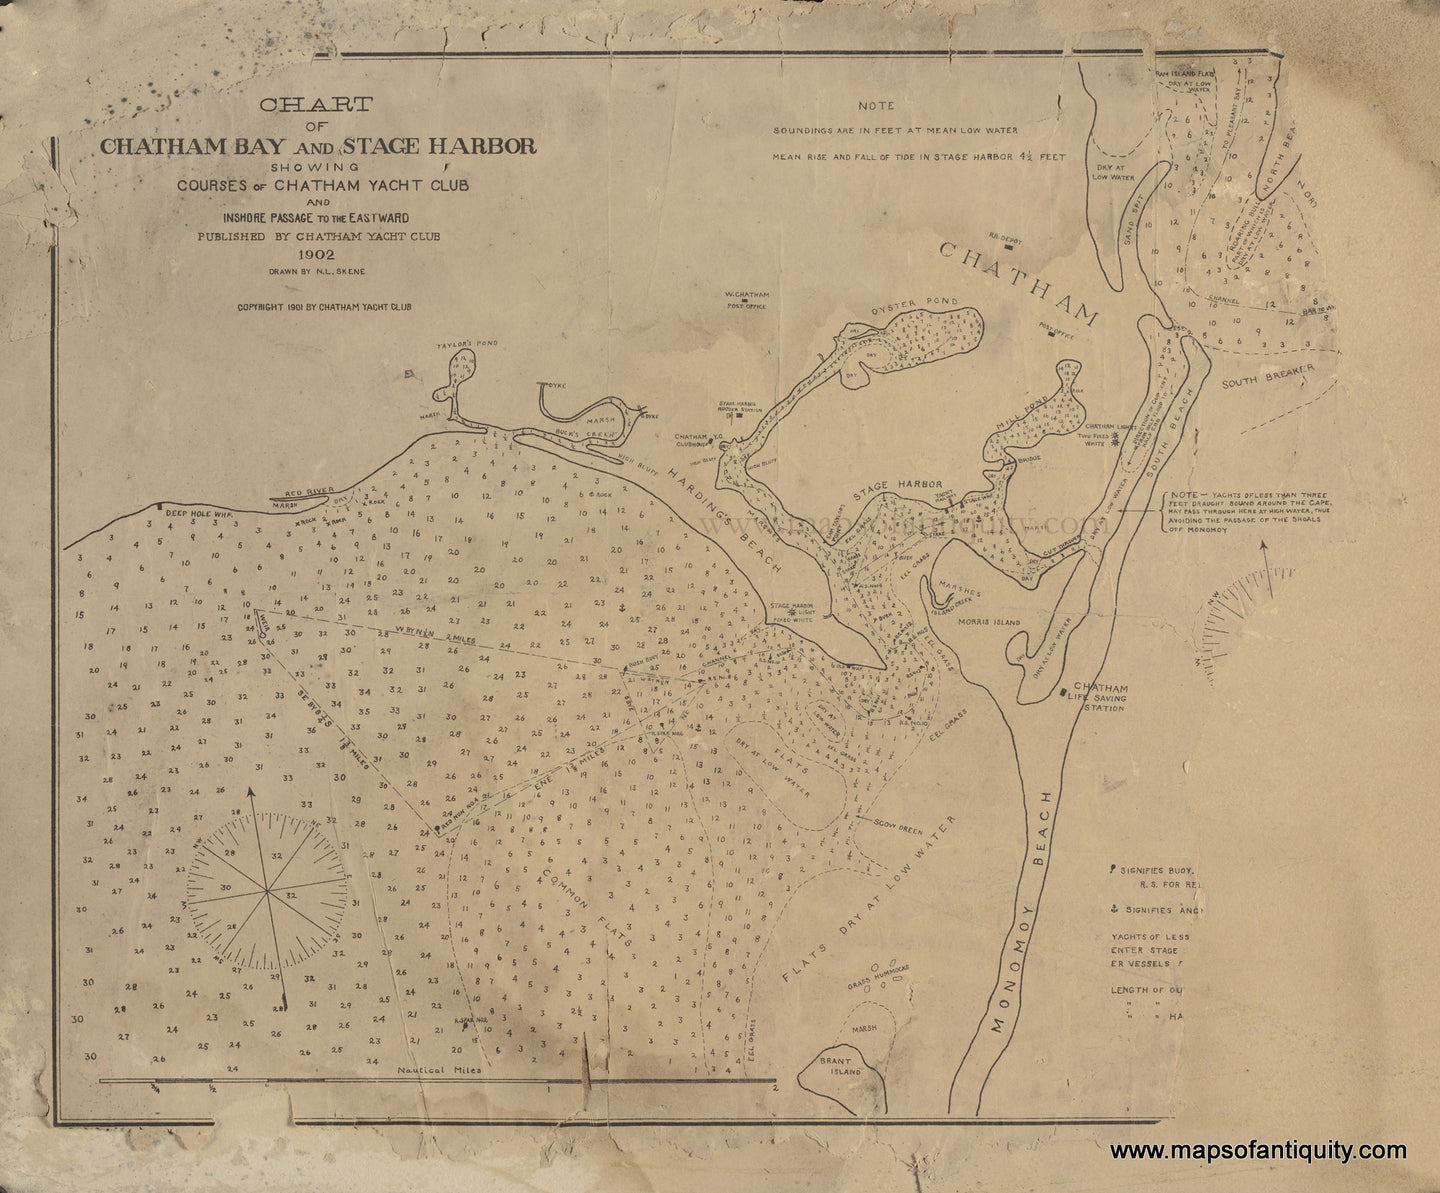 Reproduction of an old chart of the coast of Chatham, Mass with black ink printing and tan toned paper. It shows major sailing waters in the area with water depths. Some loss of the original chart on the right edge but it does not affect the map too much.